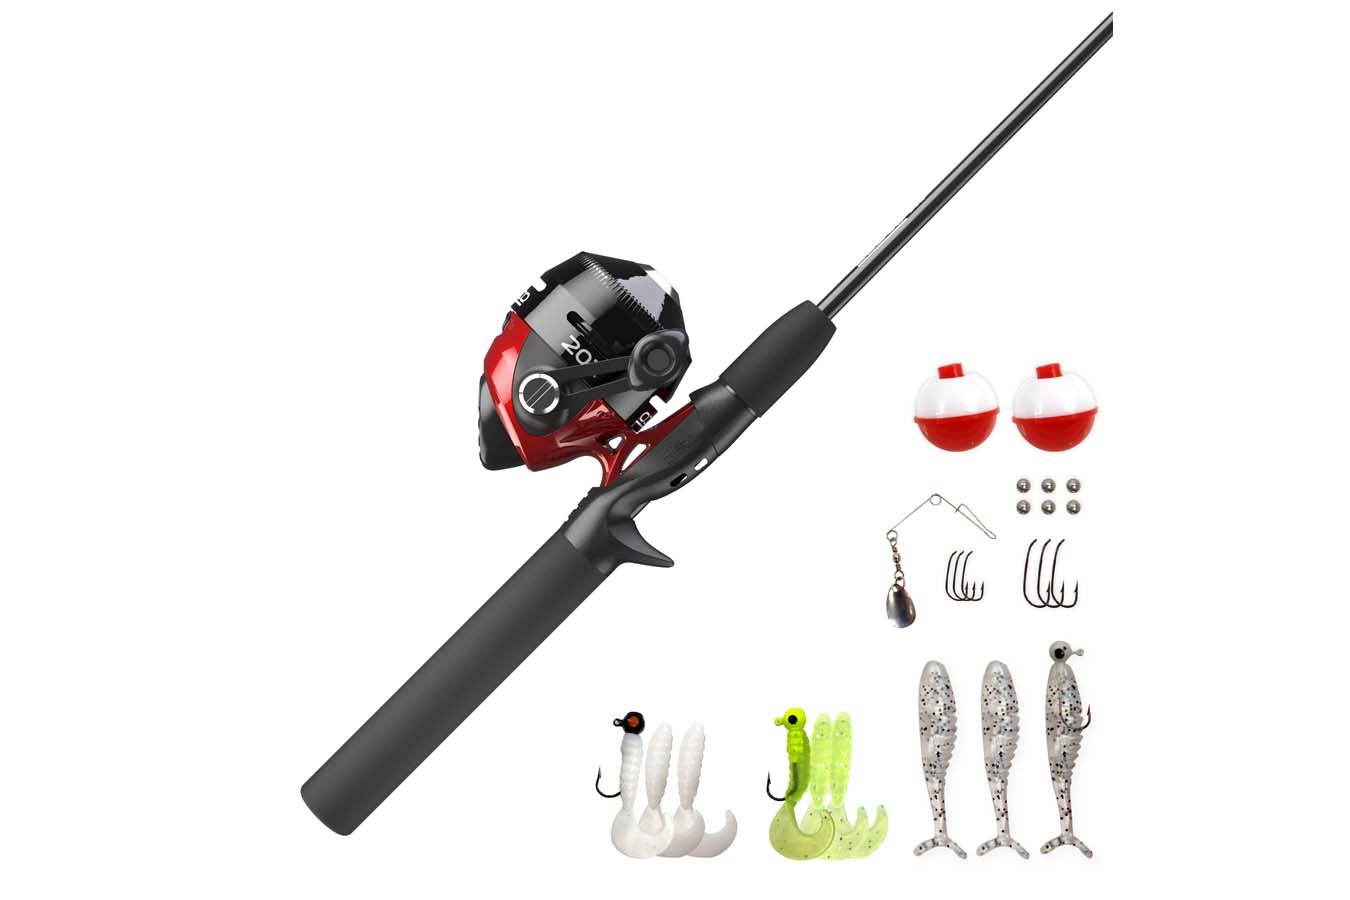 Discount Zebco 202 Spincast Combo with Tackle for Sale, Online Fishing Rod/ Reel Combo Store